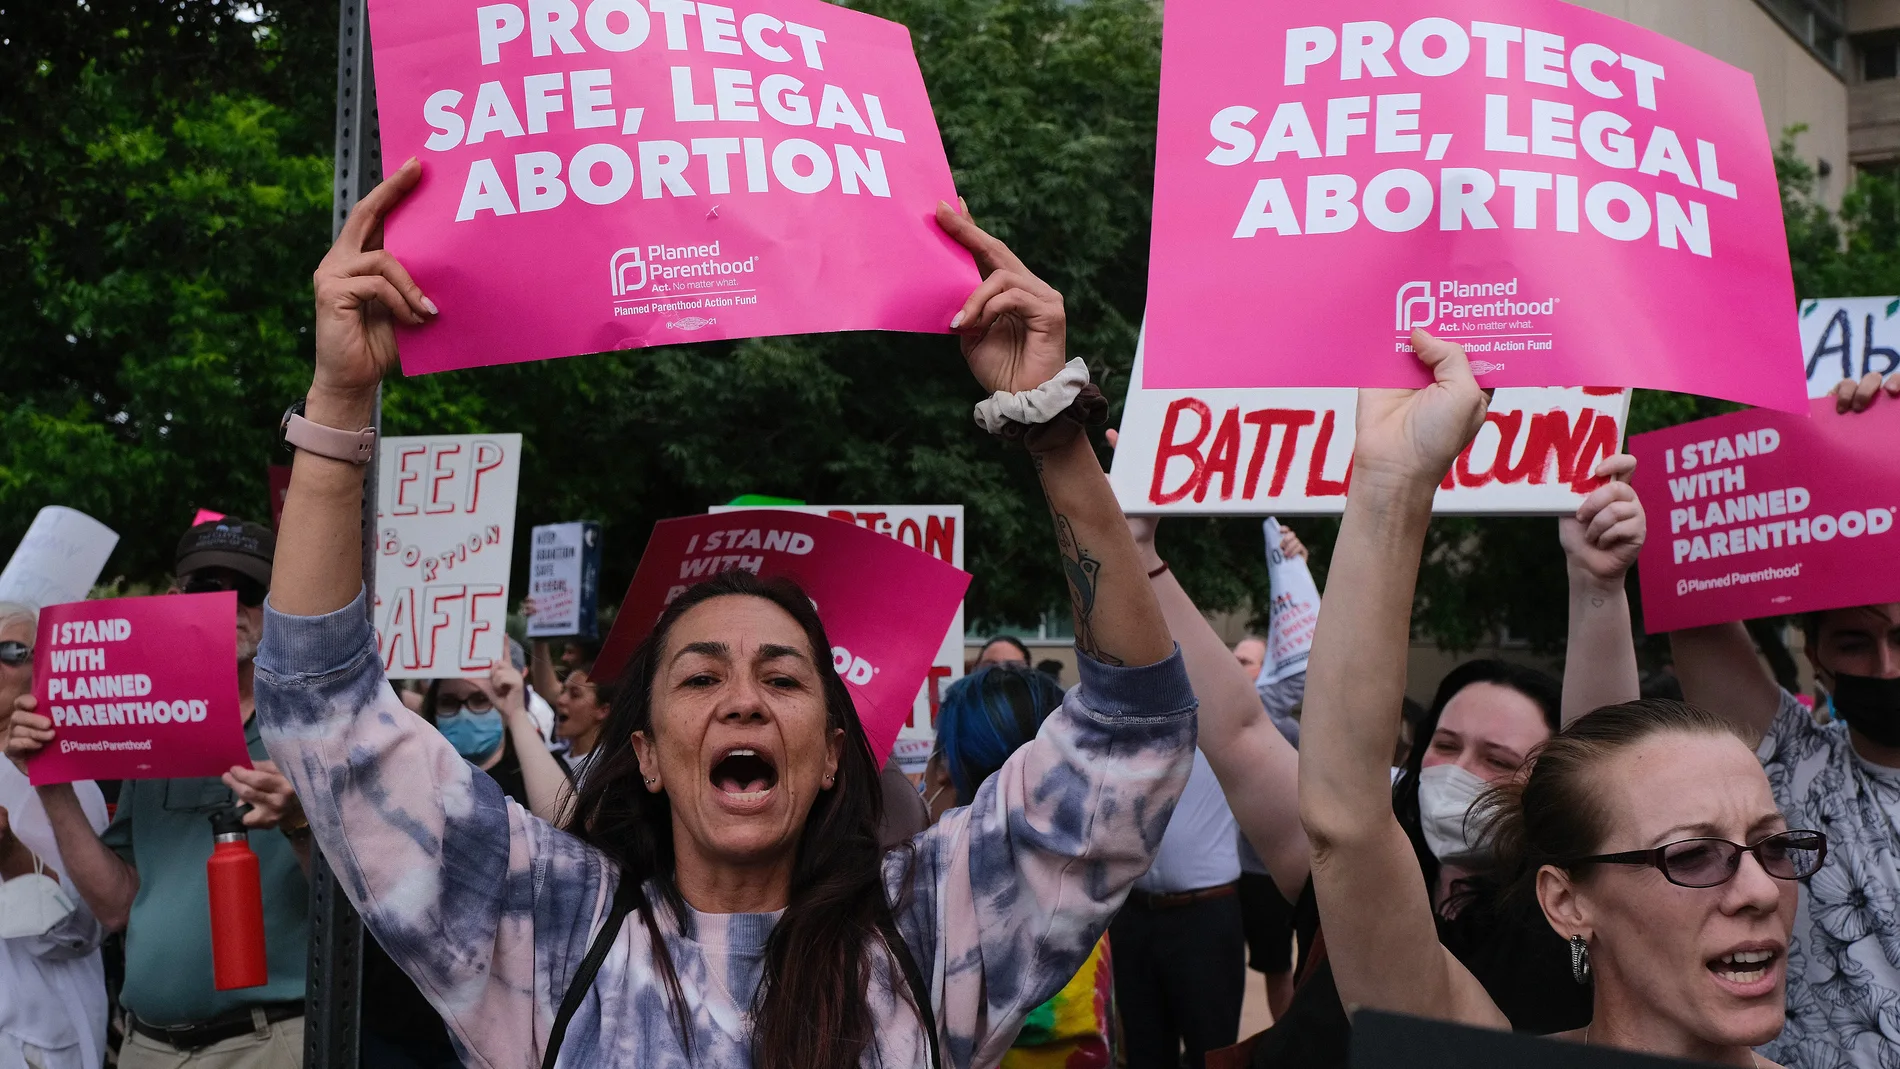 May 3, 2022, Tucson, Arizona, USA: Around a thousand Pro-Choice abortion rights demonstrators hold a rally outside the Federal Courthouse in Tucson. They came out to protest after a leaked draft majority opinion from the Supreme Court showed that Roe Vs Wade will be overturned severely limiting or in some States eliminating the right to an abortion. Abortion in the United States has been legal for over 50 years since the landmark court decision guaranteeing access to safe abortions. Now with ...